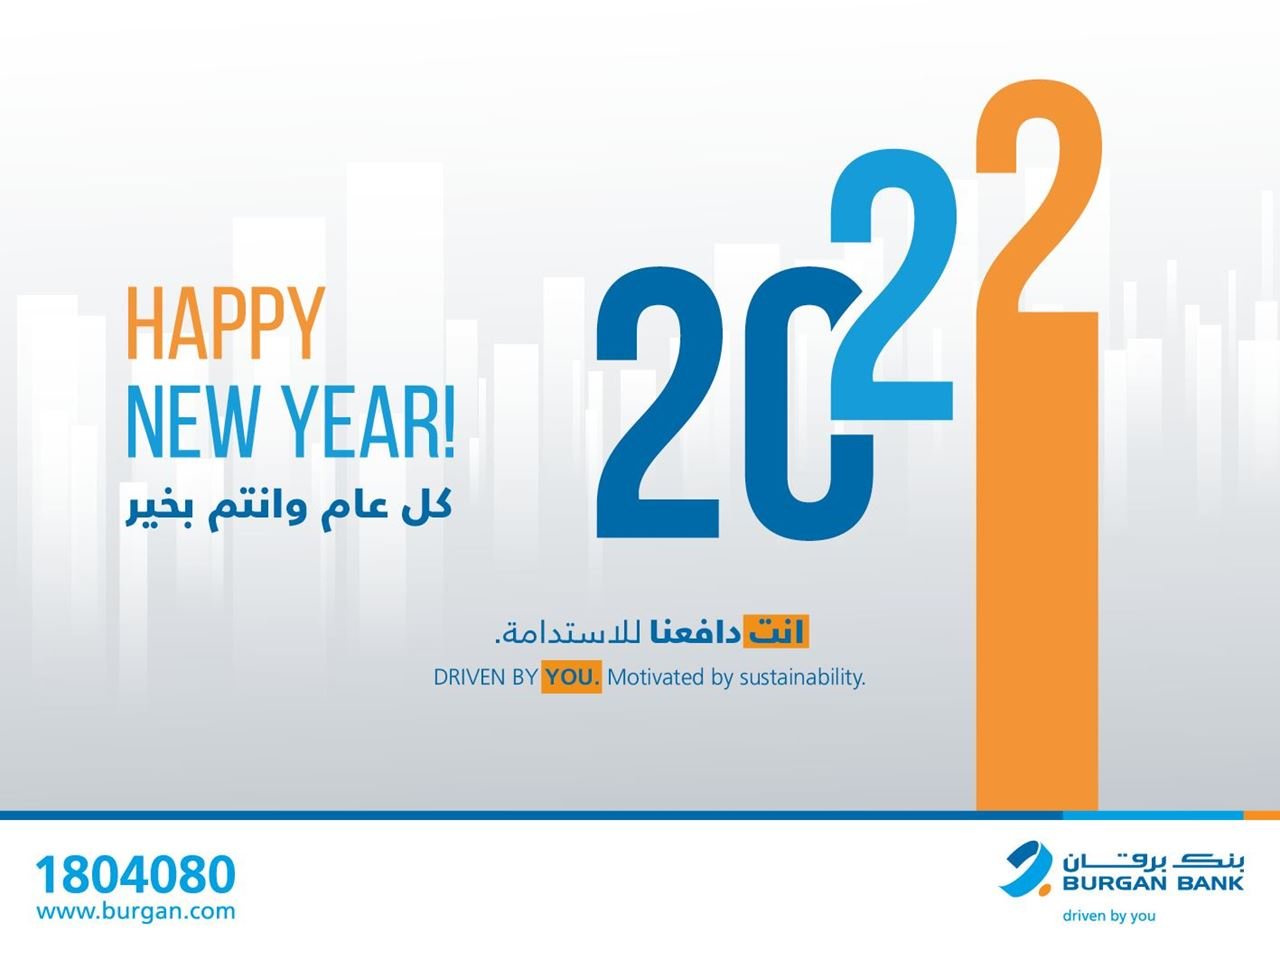 Burgan Bank continues to service customers throughout the New Year’s holiday